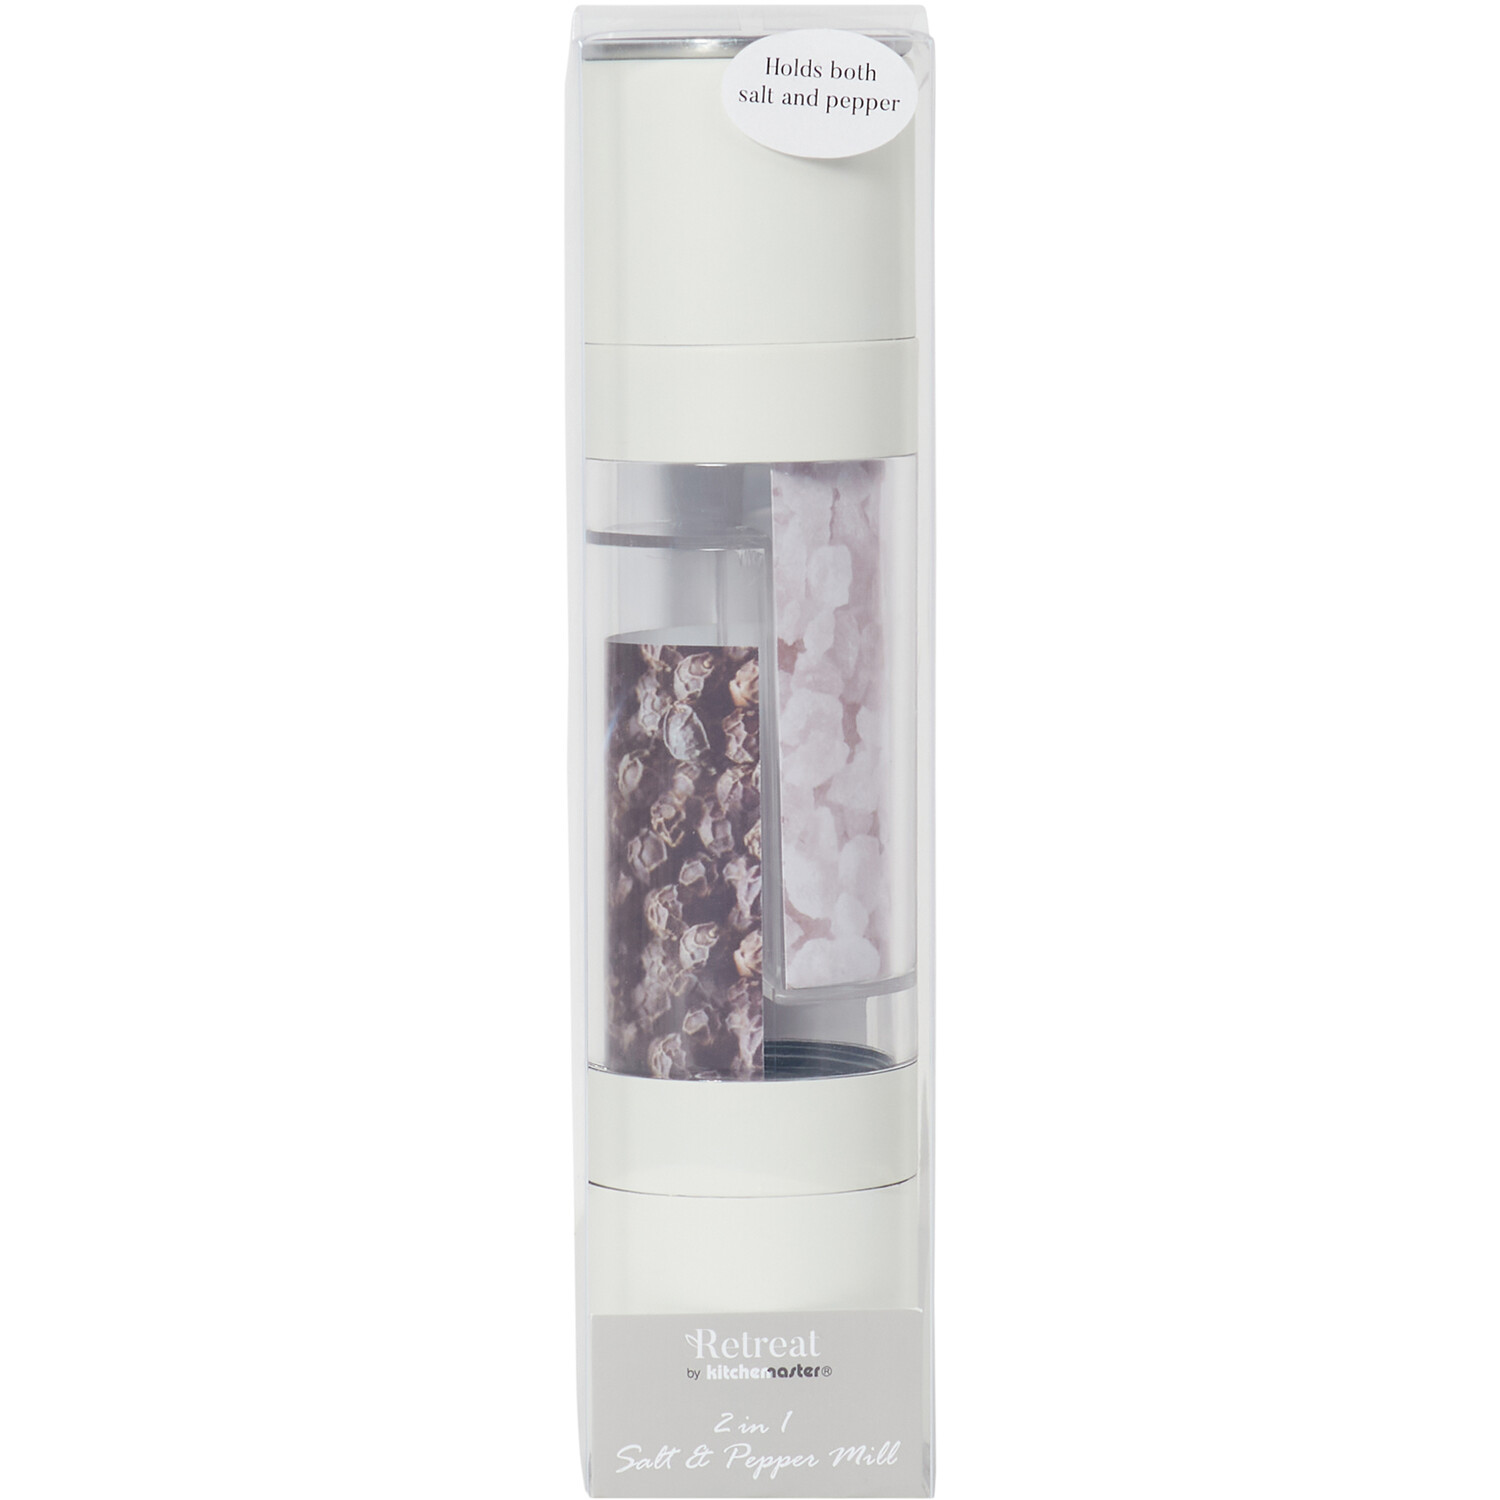 Retreat 2-in-1 Salt and Pepper Mill - Ivory Image 1